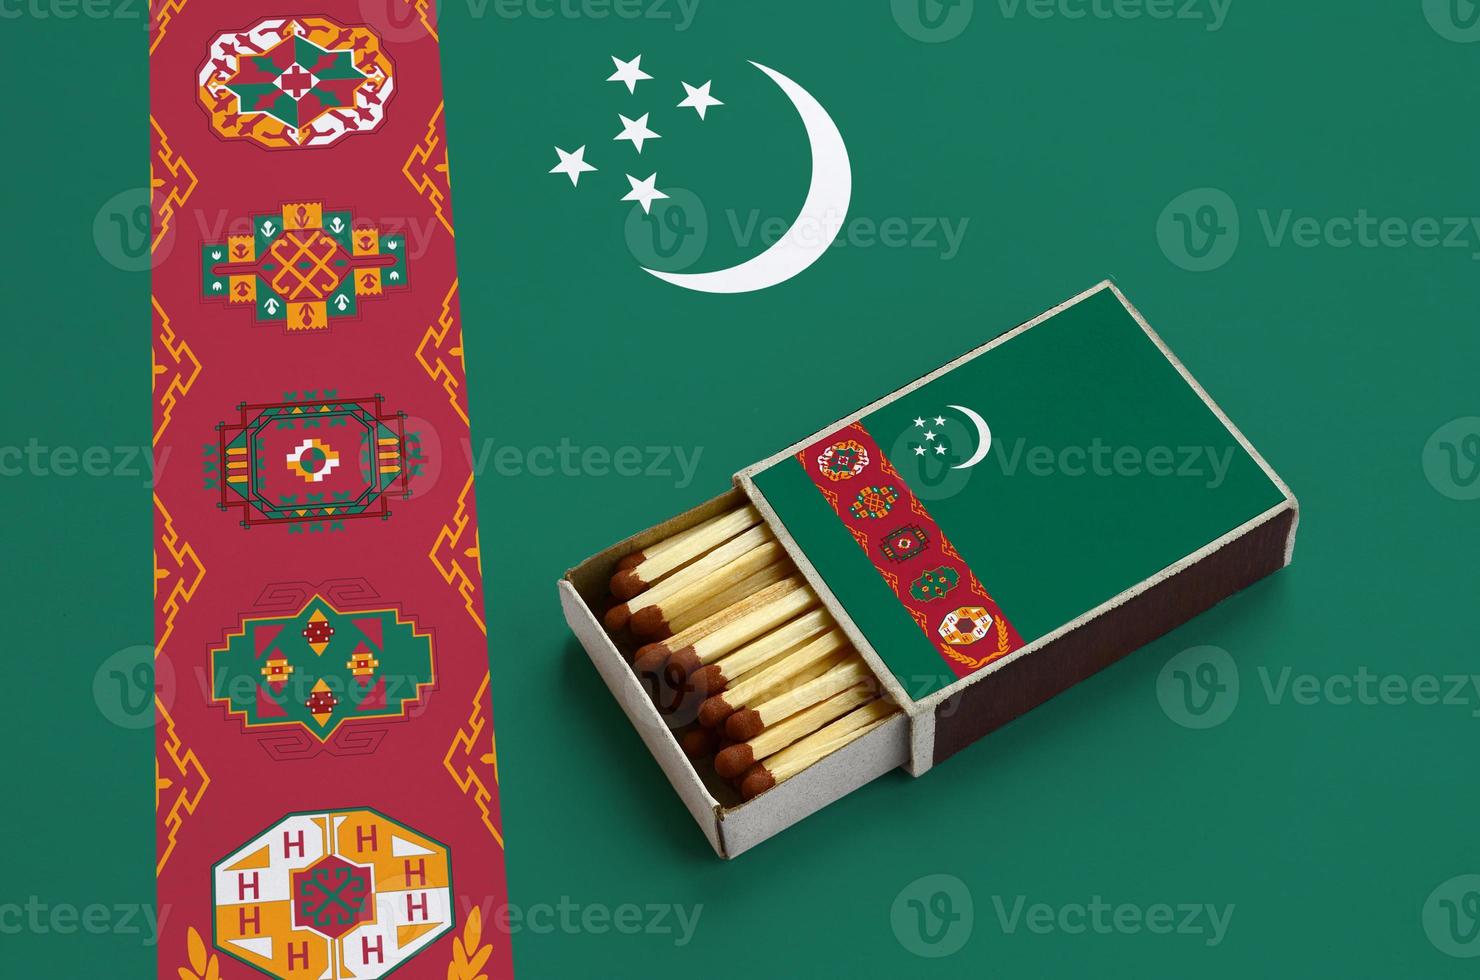 Turkmenistan flag is shown in an open matchbox, which is filled with matches and lies on a large flag photo